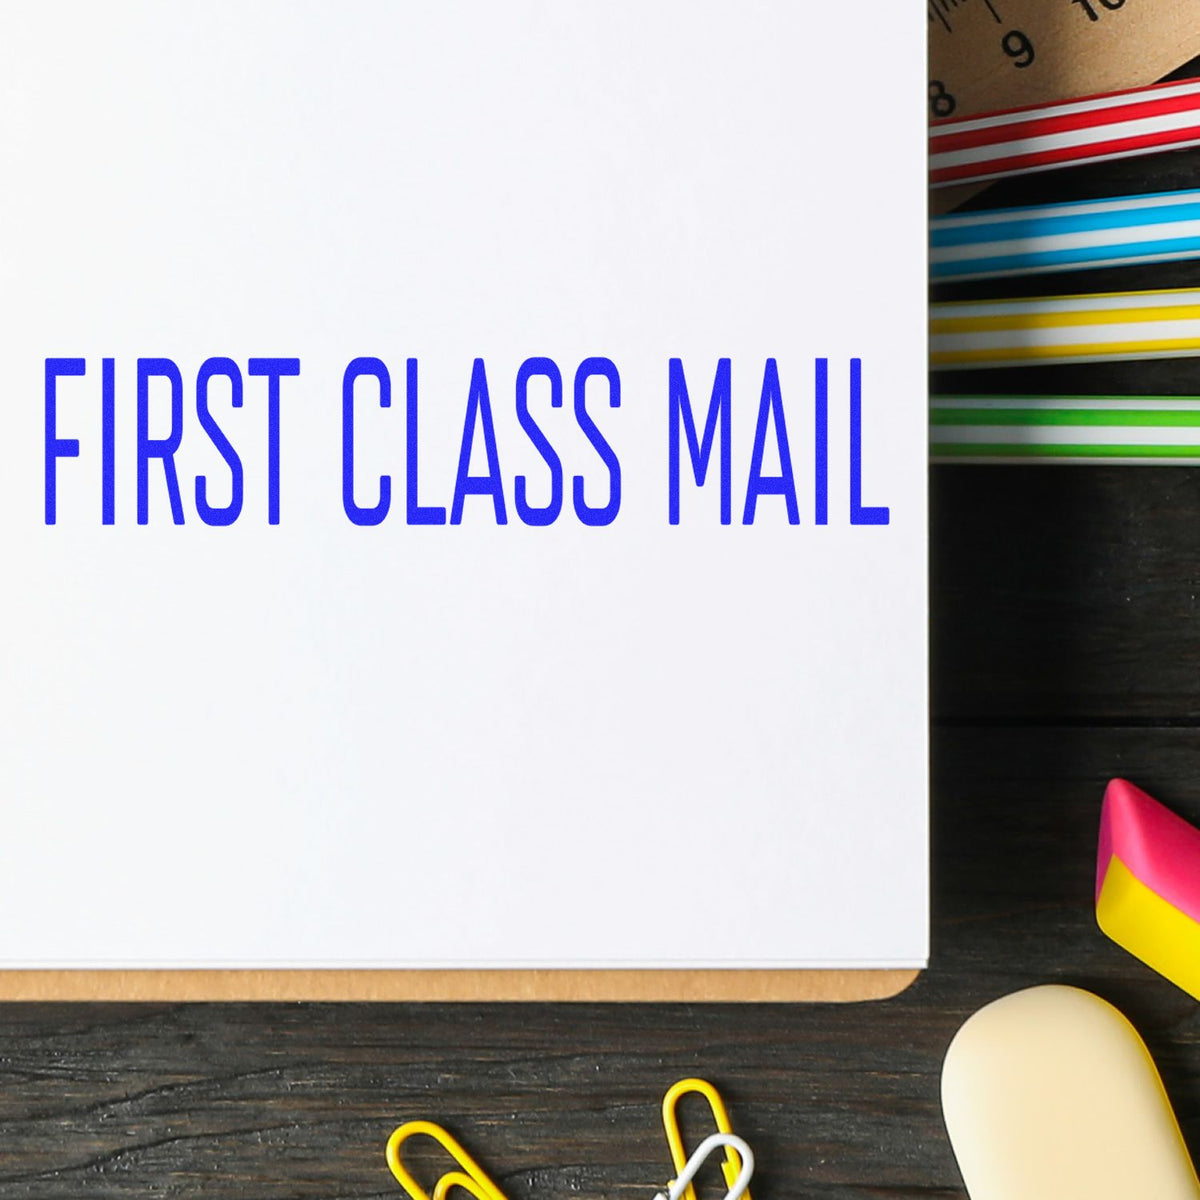 Narrow Font First Class Mail Rubber Stamp In Use Photo